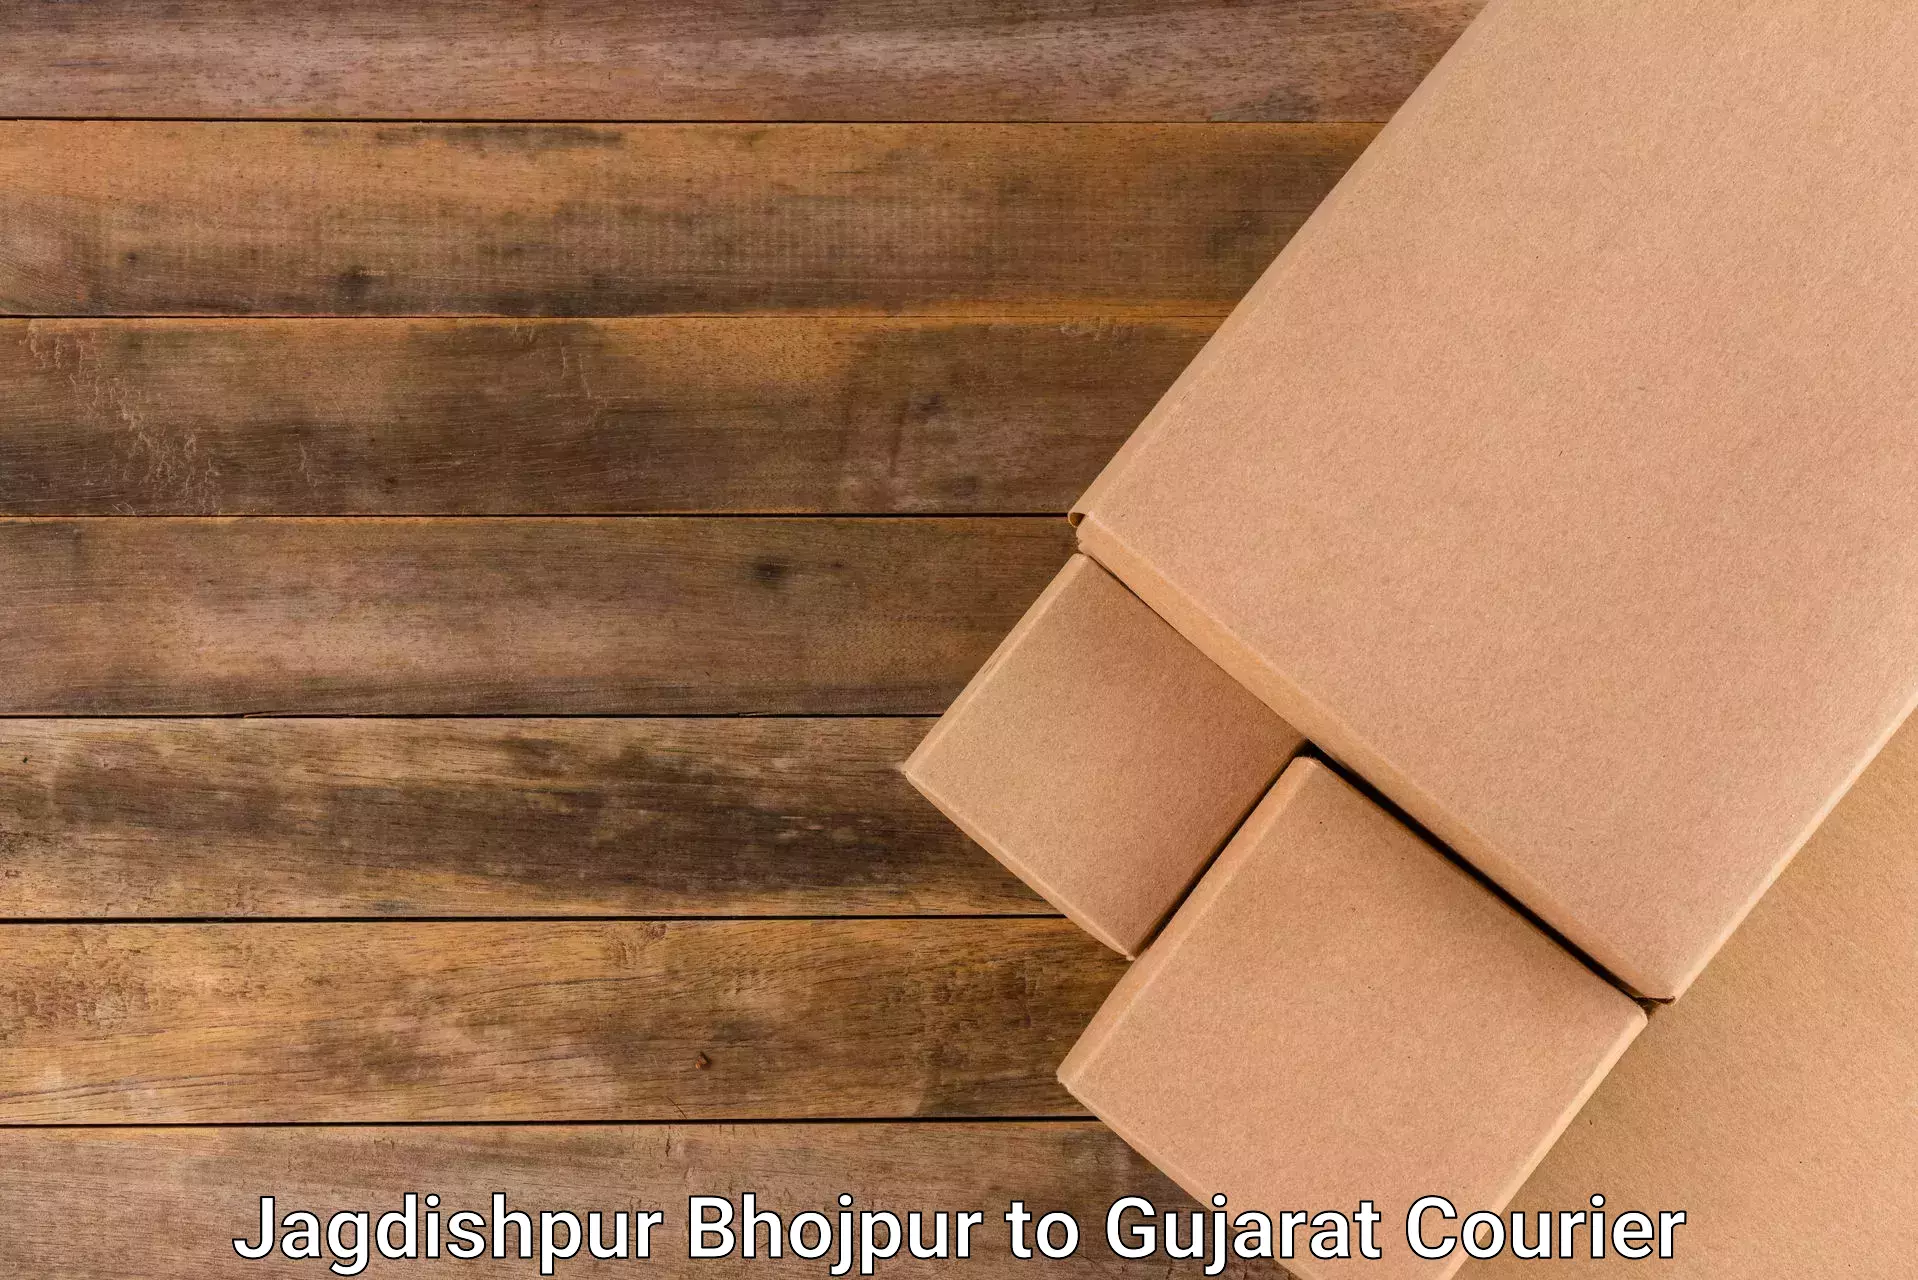 Reliable courier service Jagdishpur Bhojpur to Patdi